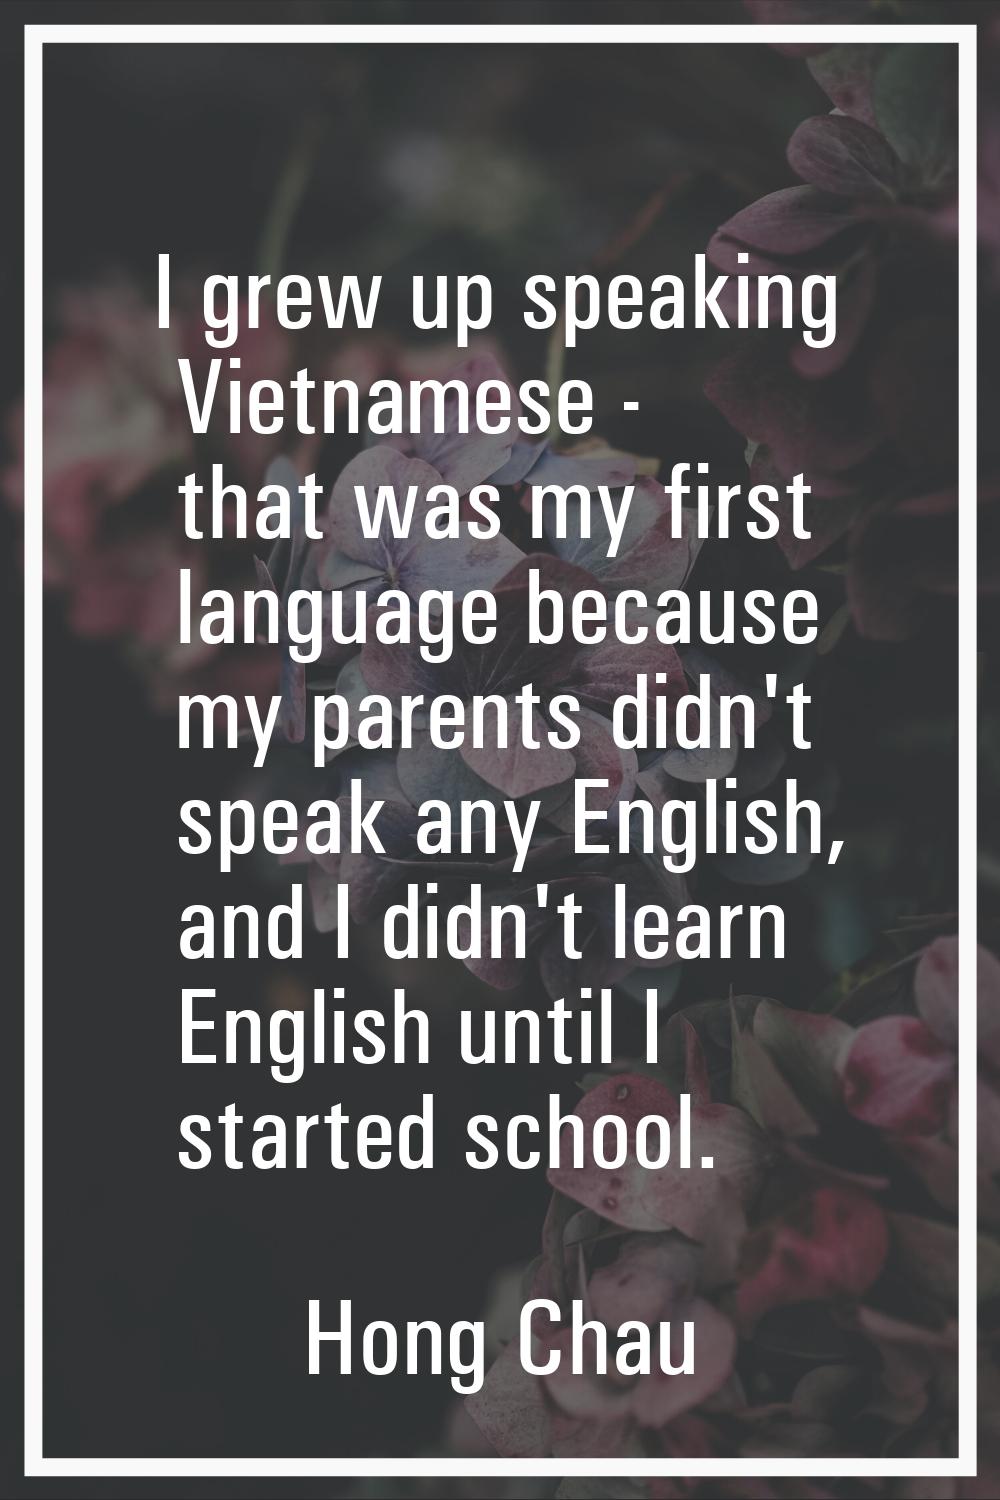 I grew up speaking Vietnamese - that was my first language because my parents didn't speak any Engl